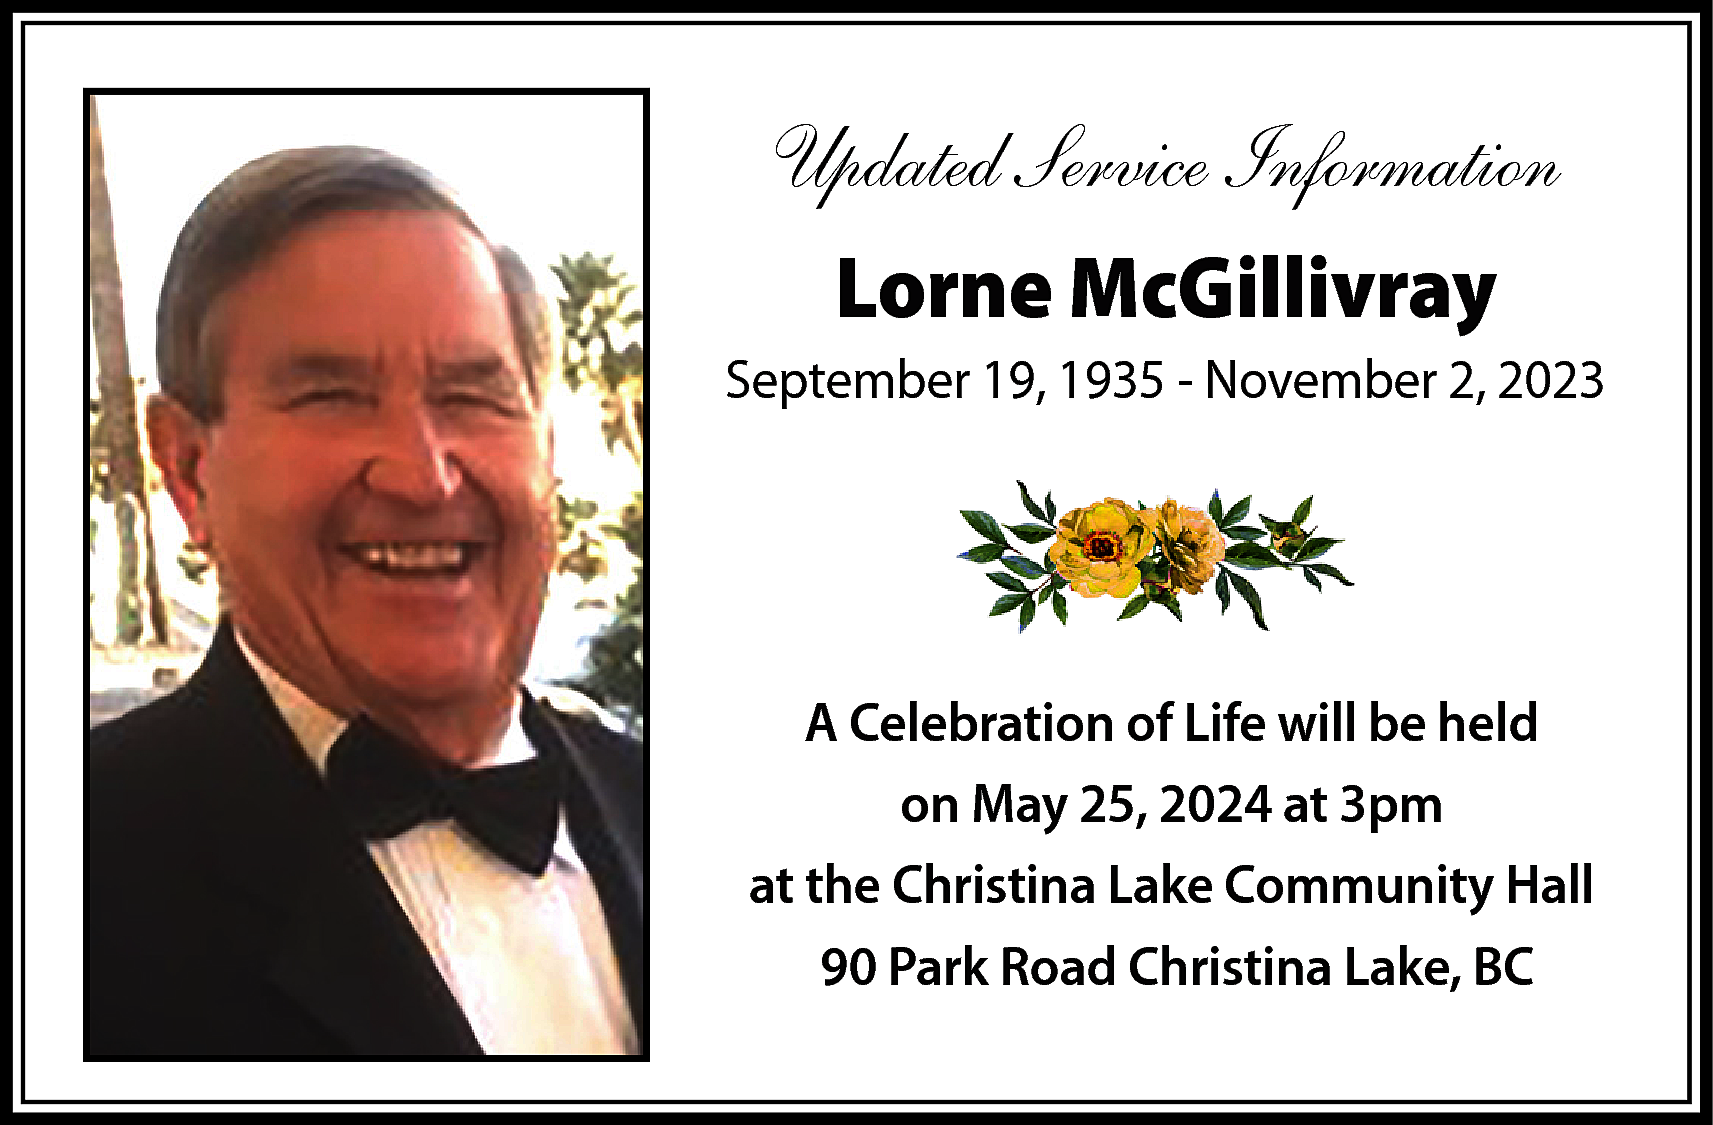 Updated Service Information <br>Lorne McGillivray  Updated Service Information  Lorne McGillivray  September 19, 1935 - November 2, 2023    A Celebration of Life will be held  on May 25, 2024 at 3pm  at the Christina Lake Community Hall  90 Park Road Christina Lake, BC    